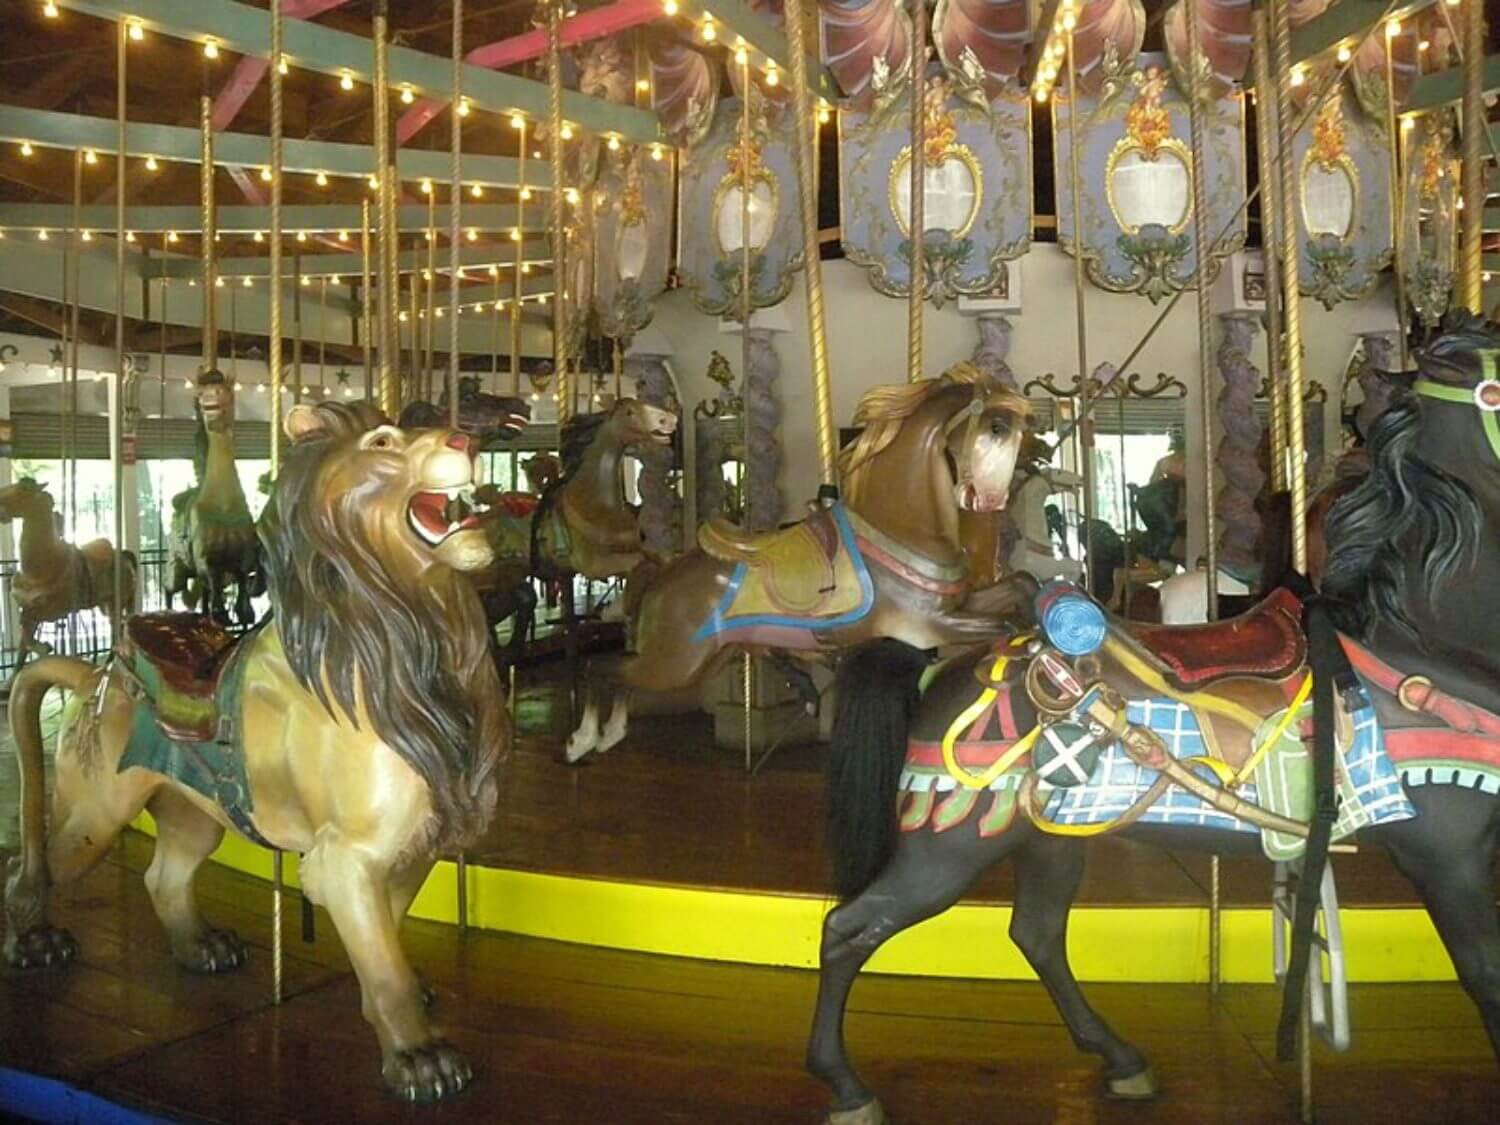 Forest Park Carousel - Wikimedia Commons photo by Jim.henderson